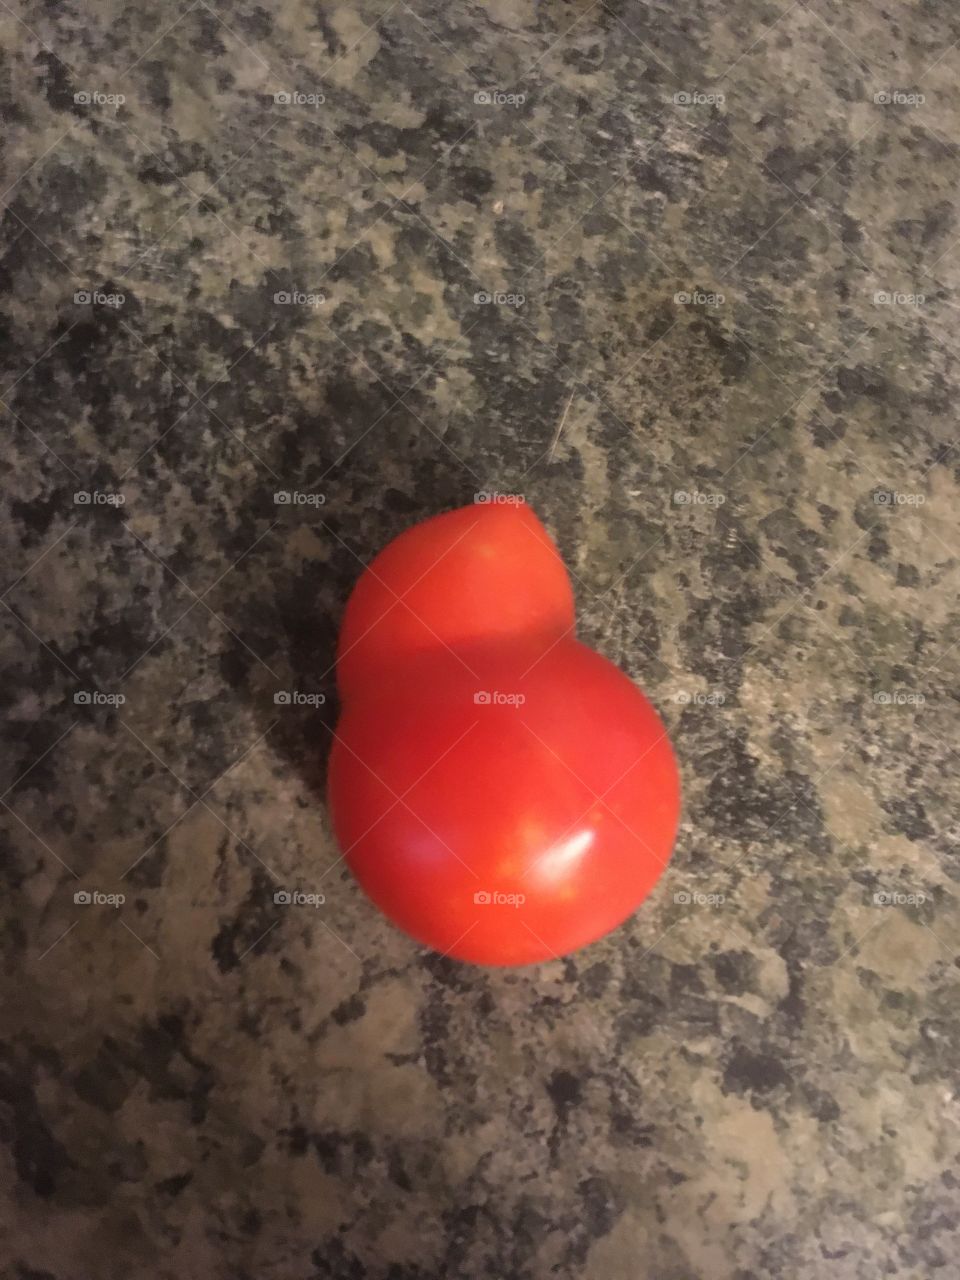 My little chick tomato. It wouldn’t stay on it’s side so you could really see it.